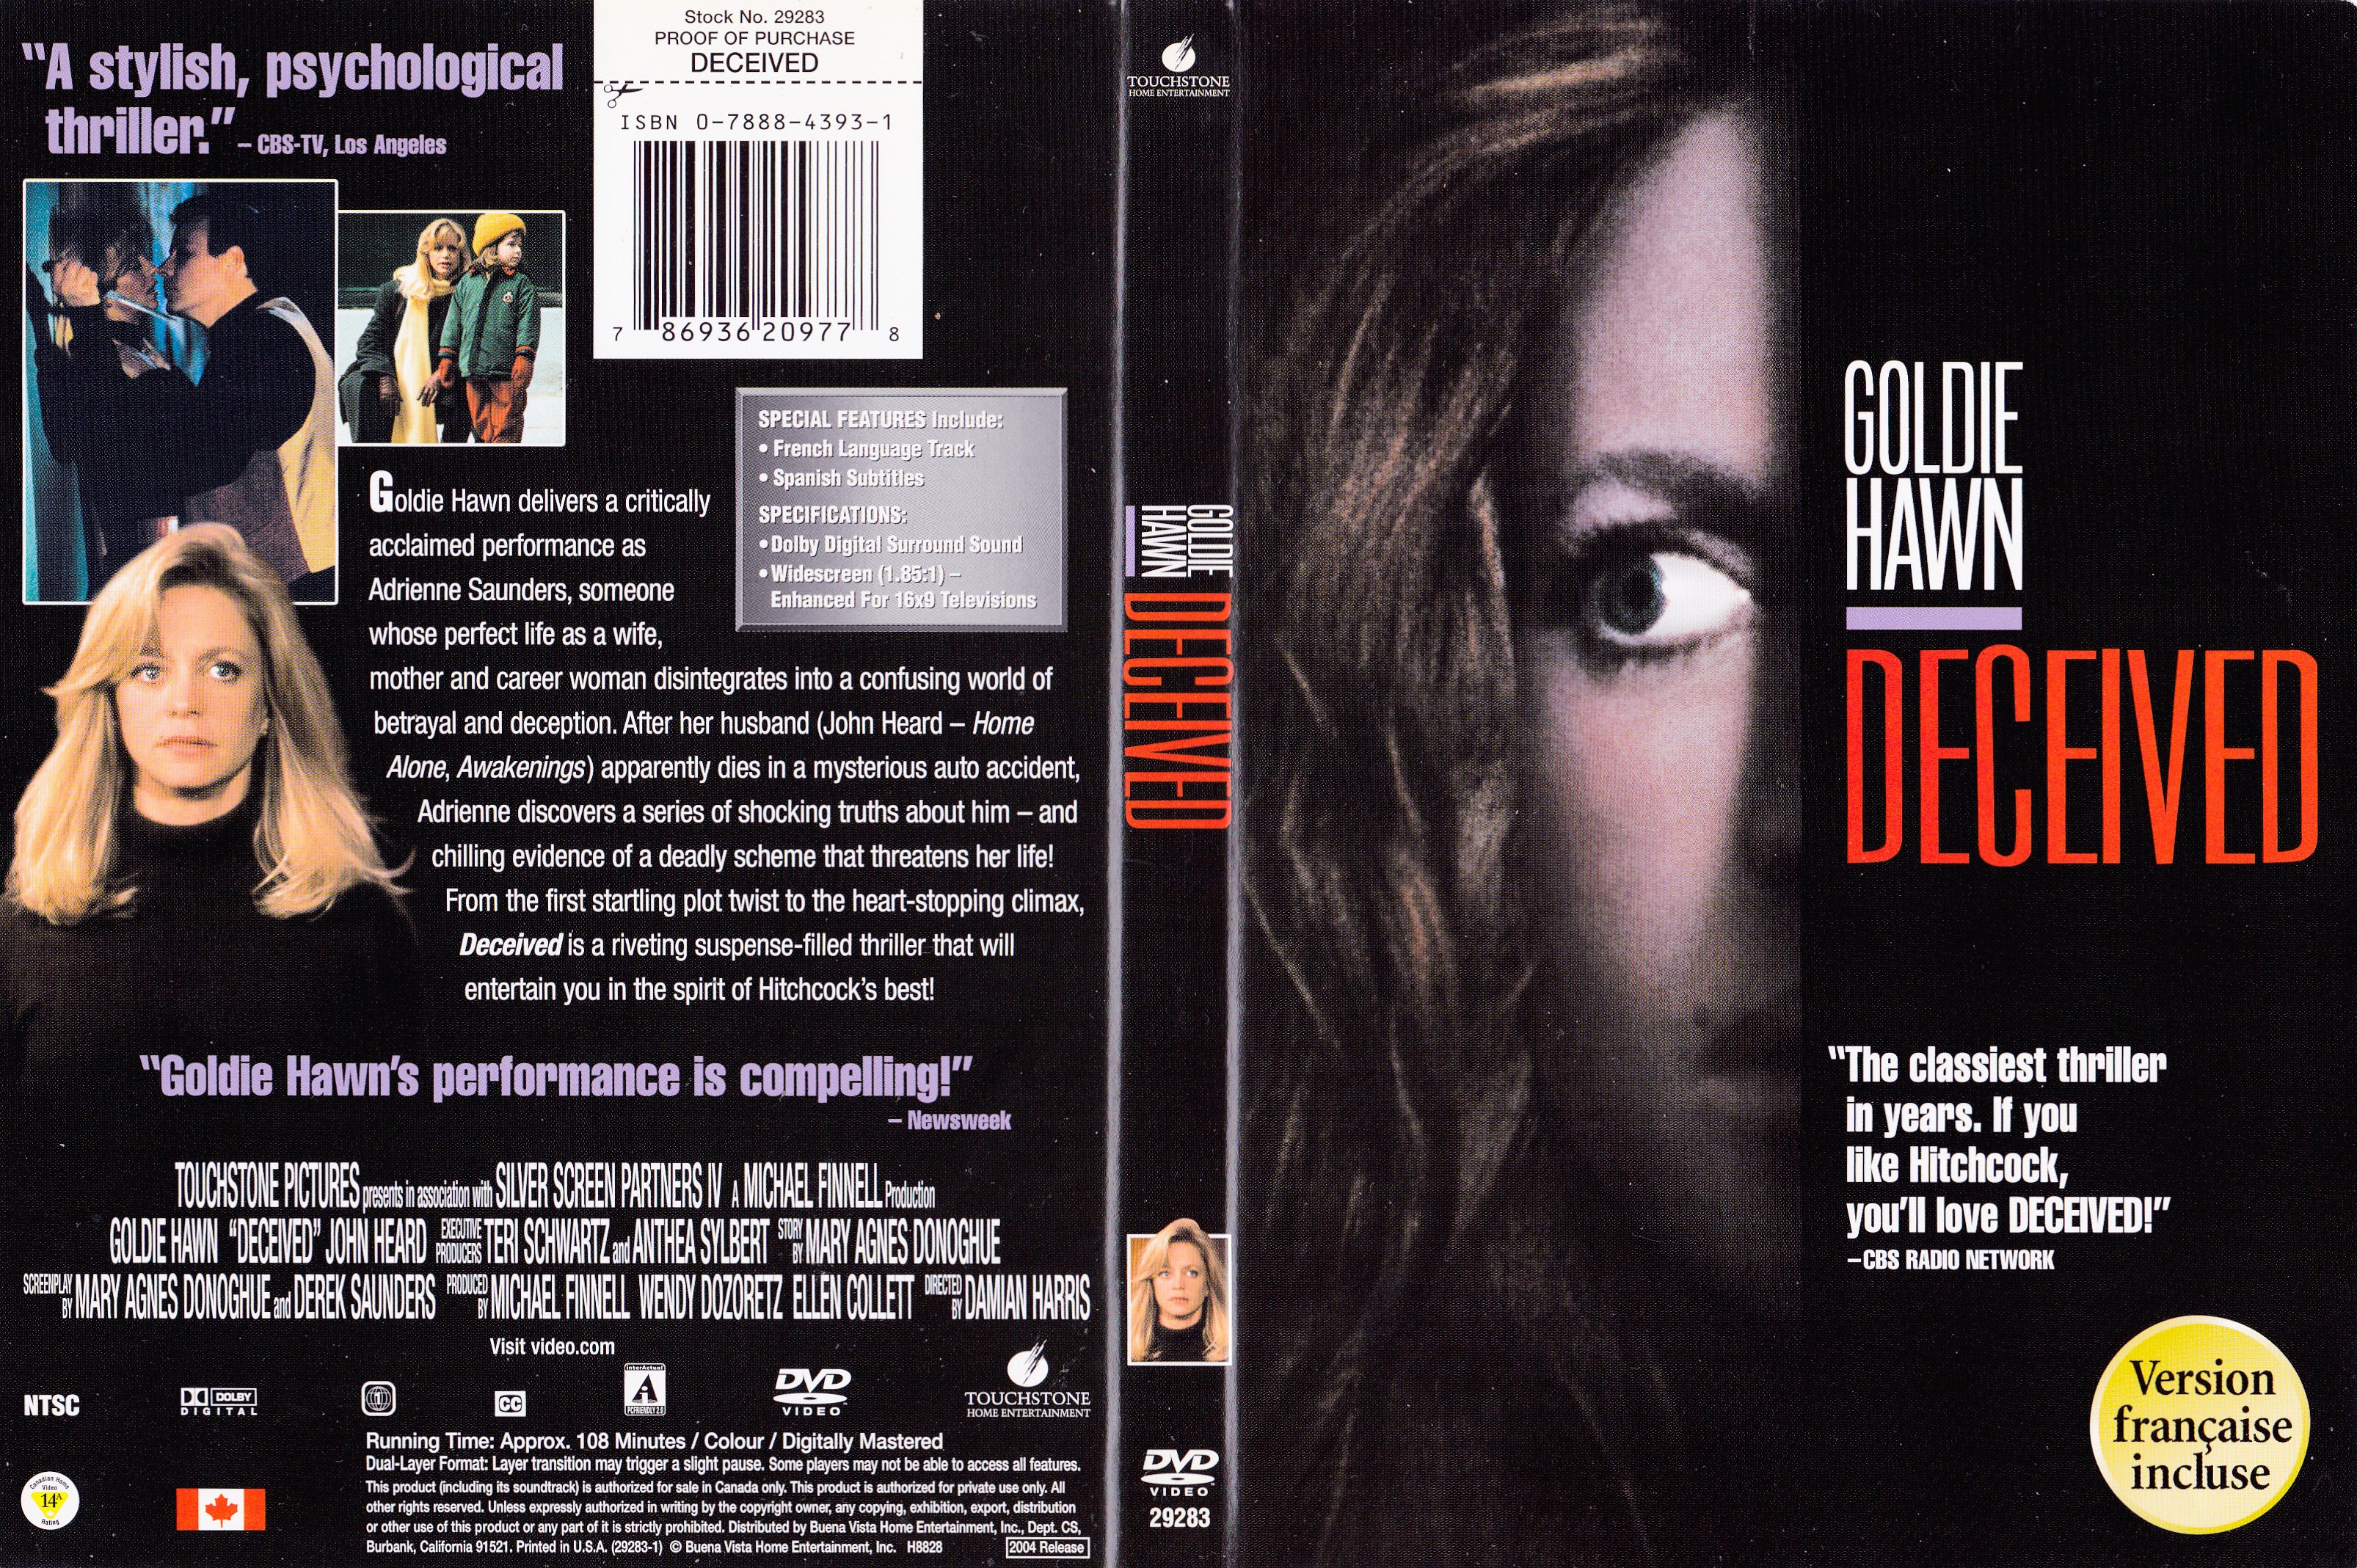 Jaquette DVD Deceived (Canadienne)